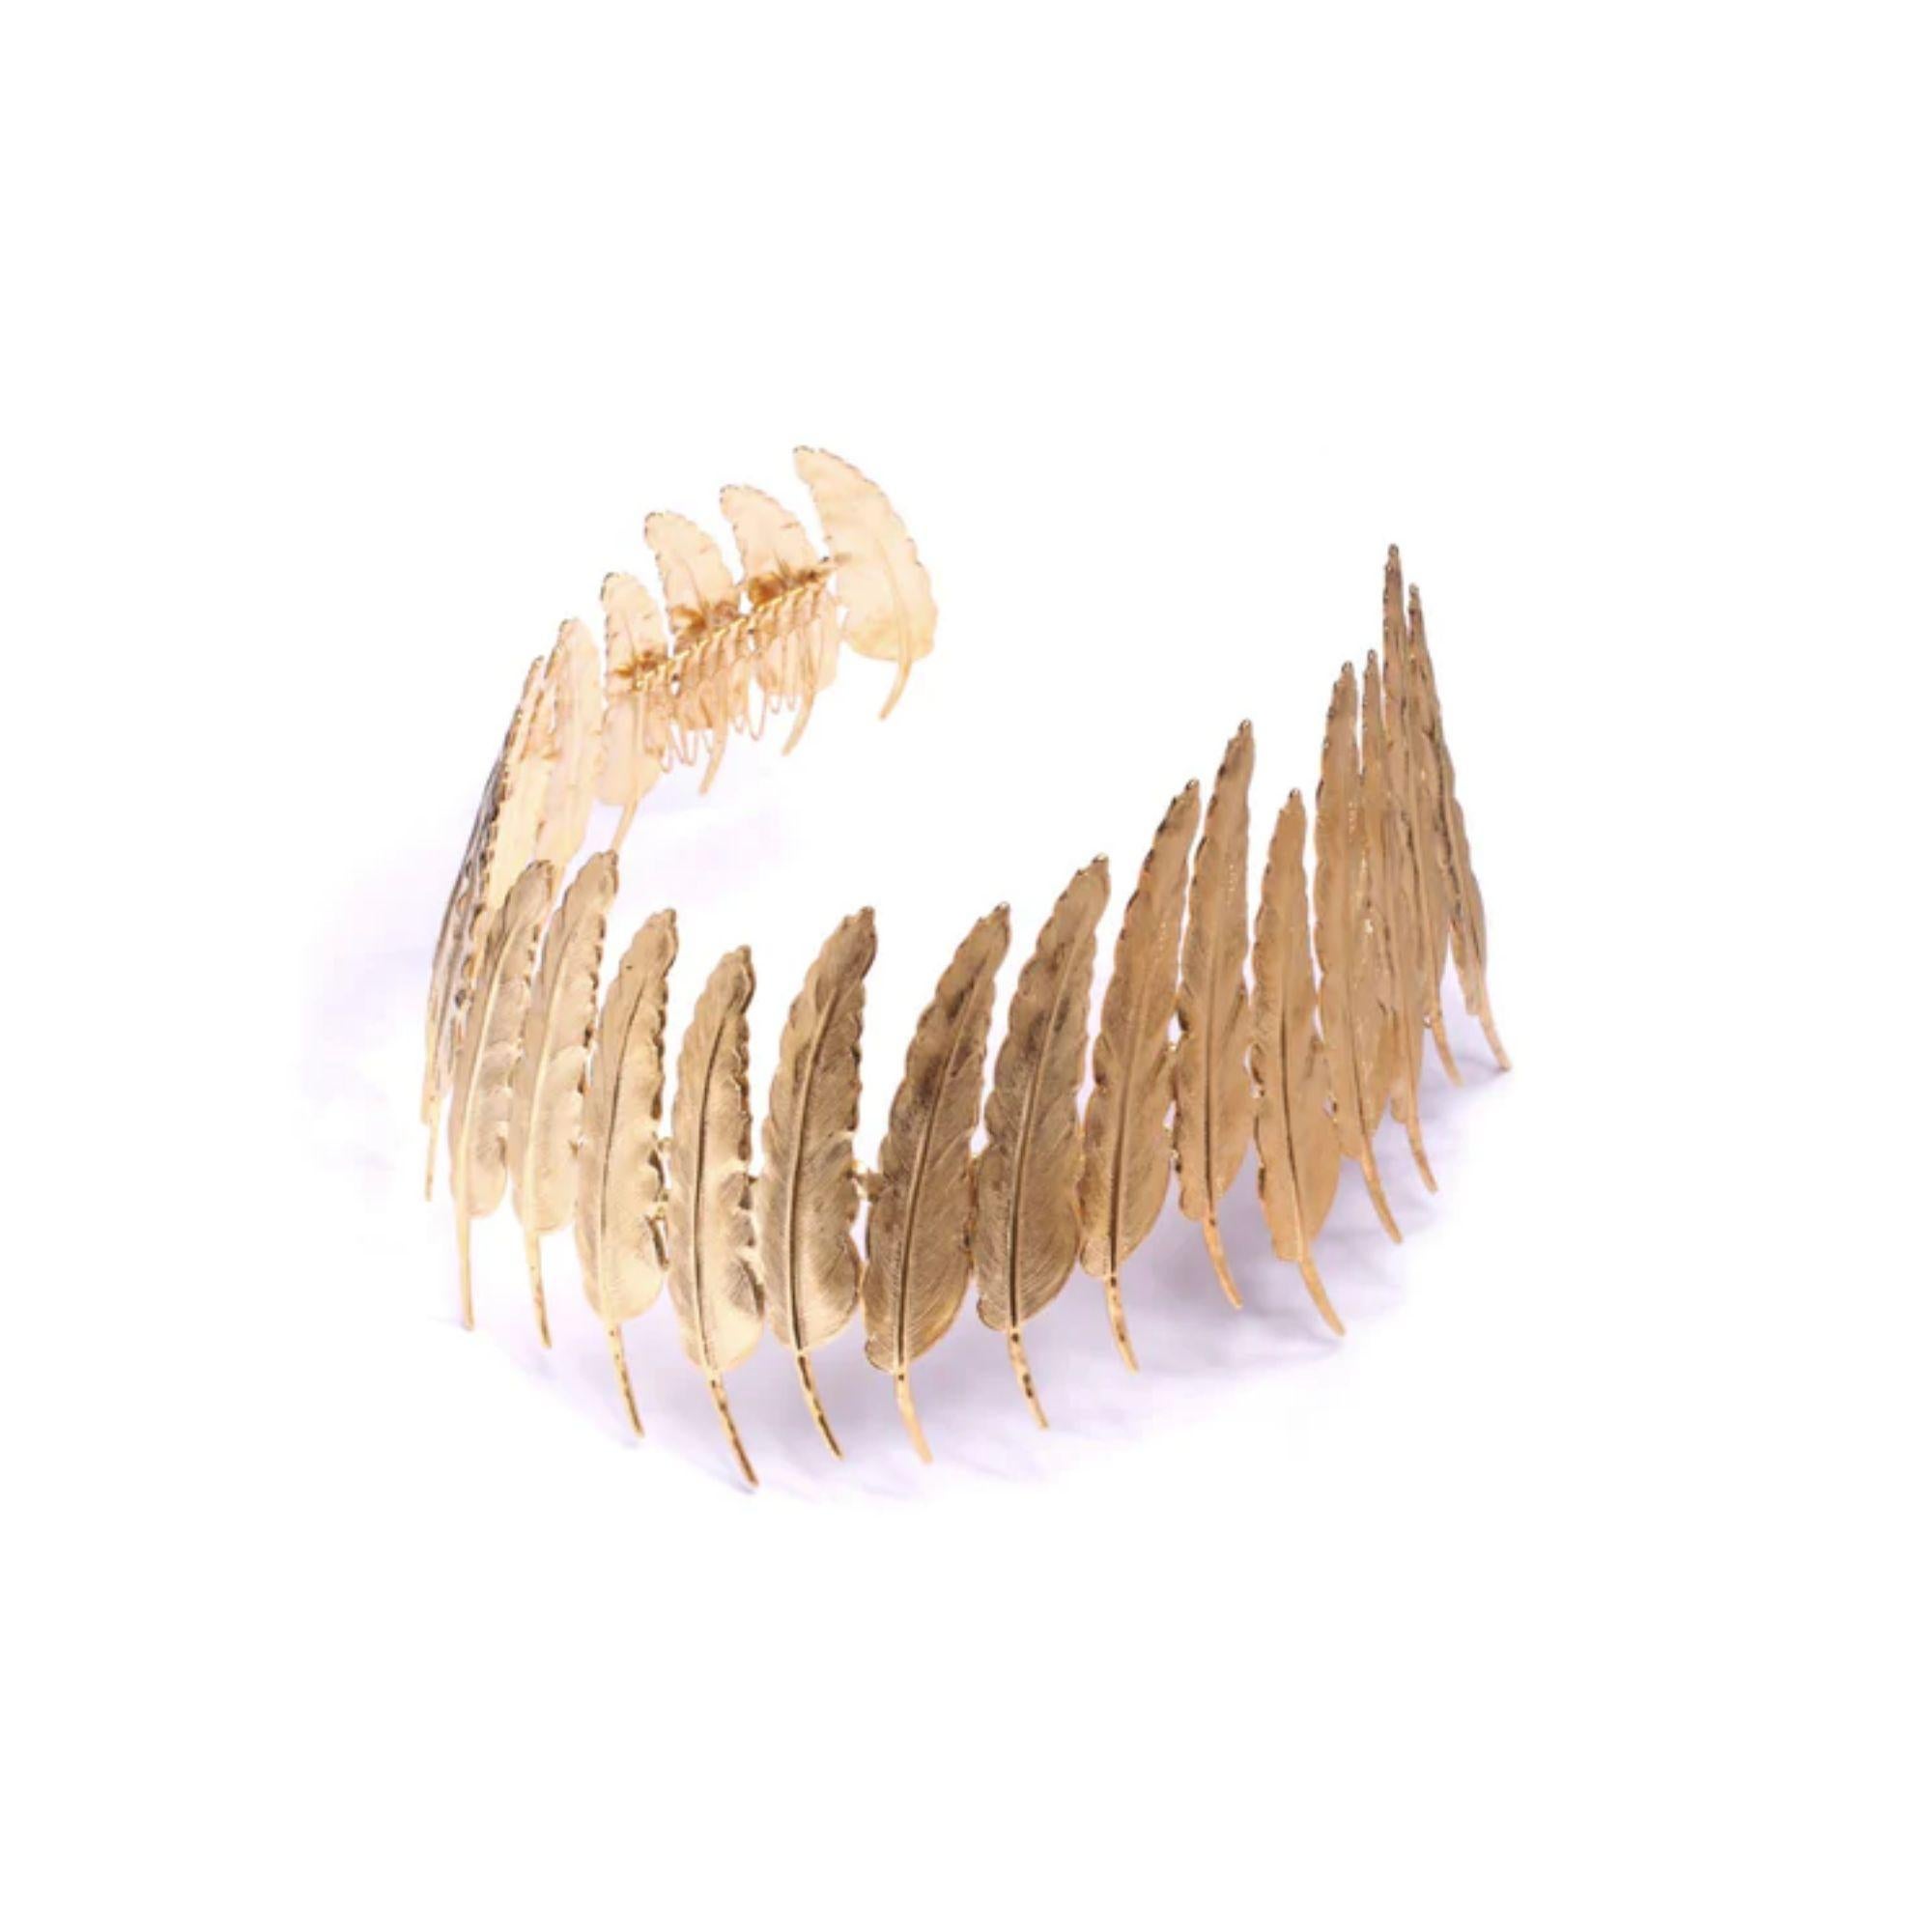 One of a kind crown worn with hidden combs securing the headpiece on. This intricate piece is all hand made with each feather hand soldered to the next and then plated in 24k gold. Plated on Brass. Made in America.

Additional Information:
Material: